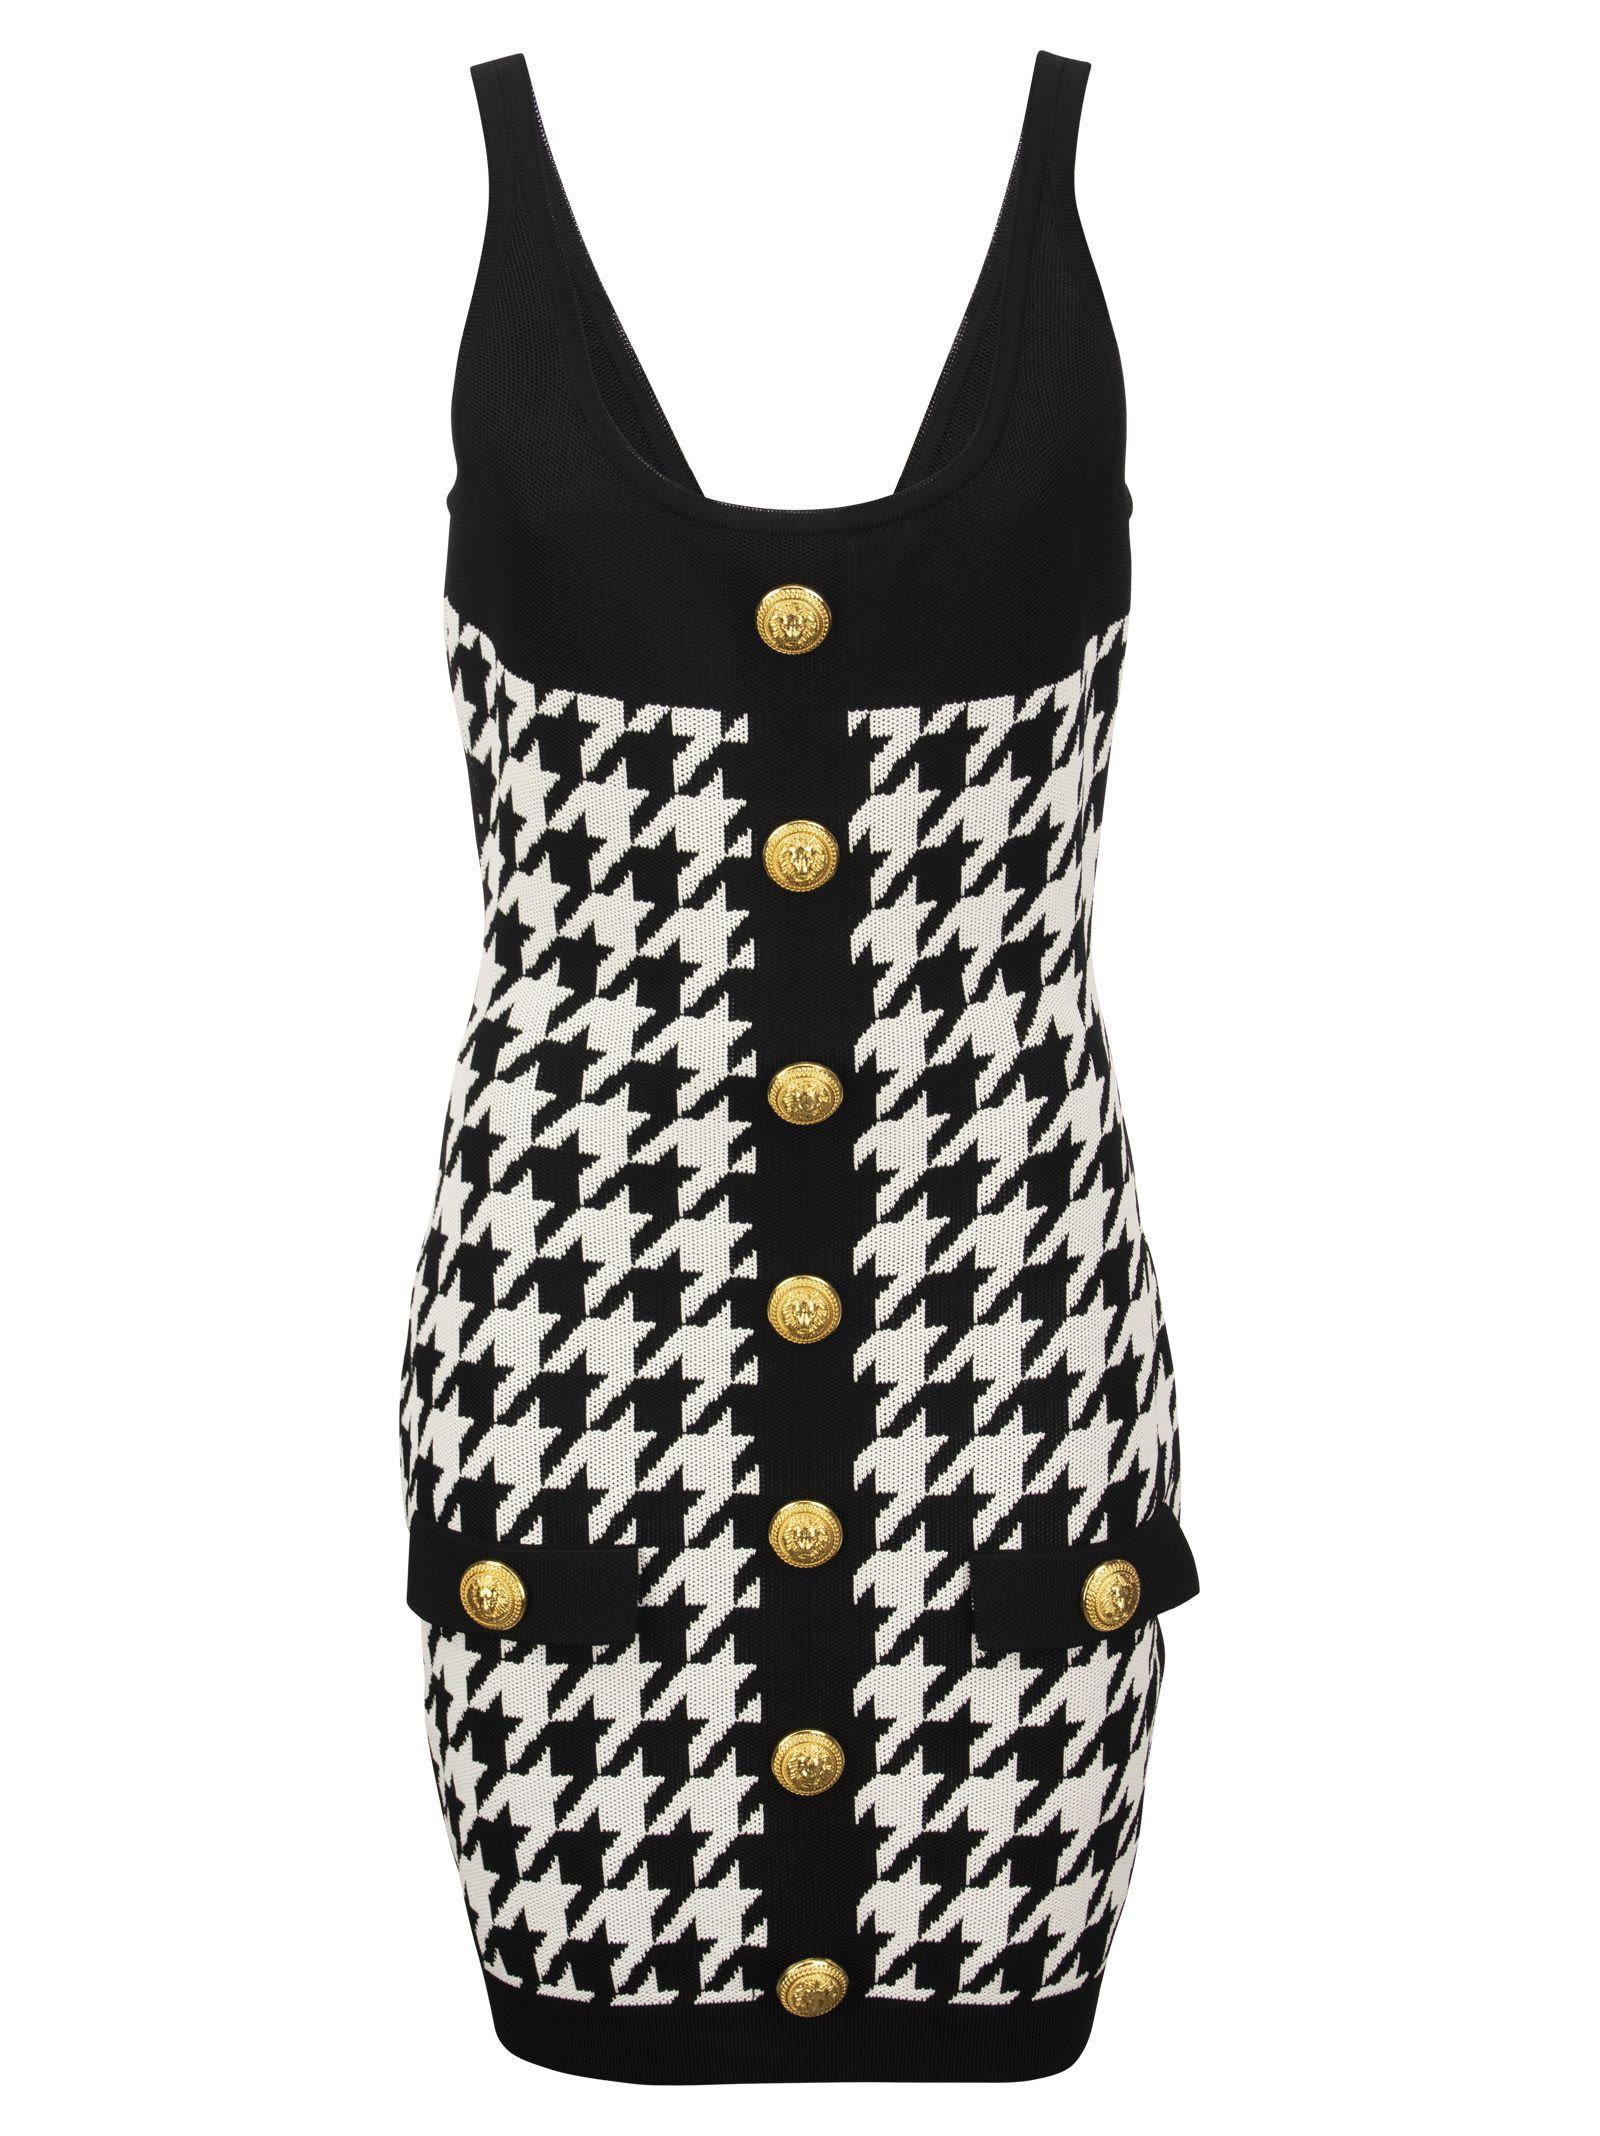 Balmain Short Knit Dress With Gold Buttons in Black | Lyst